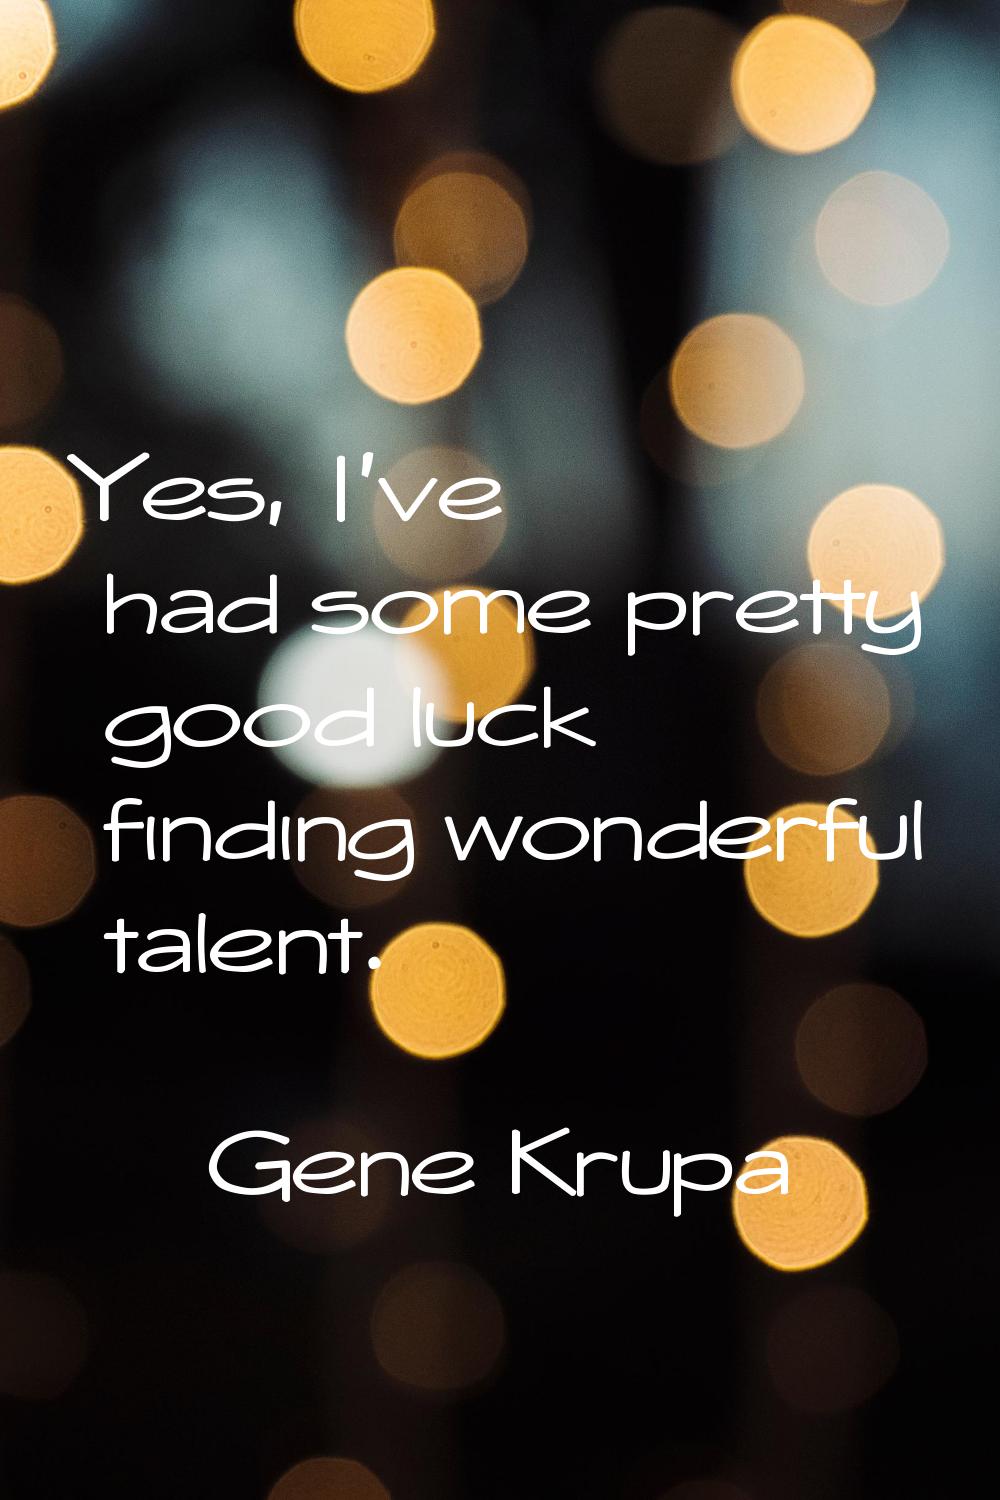 Yes, I've had some pretty good luck finding wonderful talent.